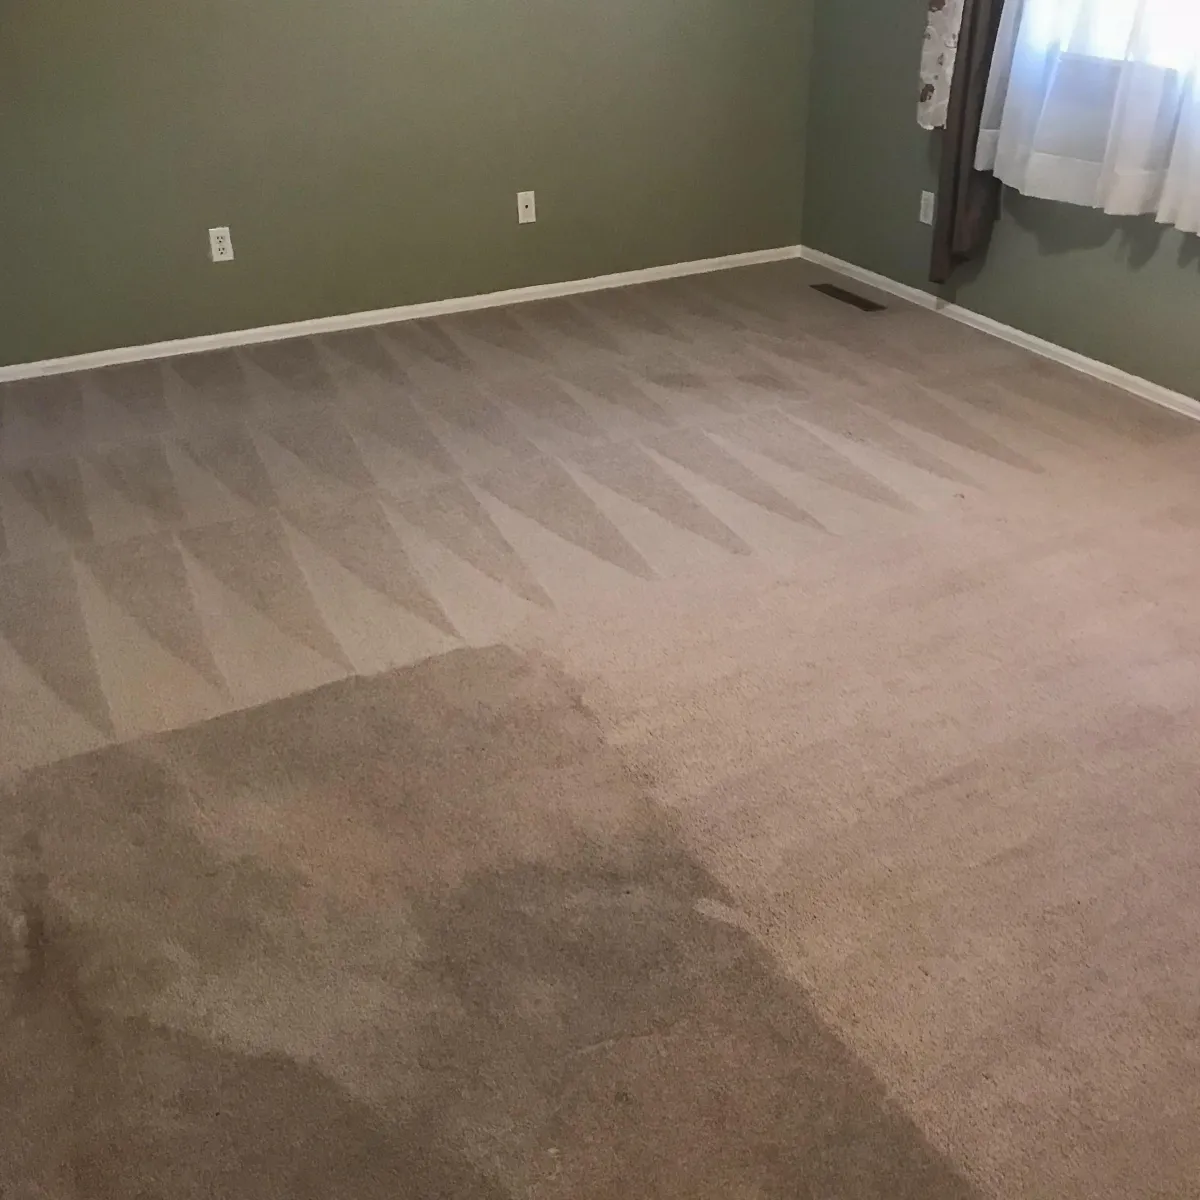 clean carpet lines after a cleaning